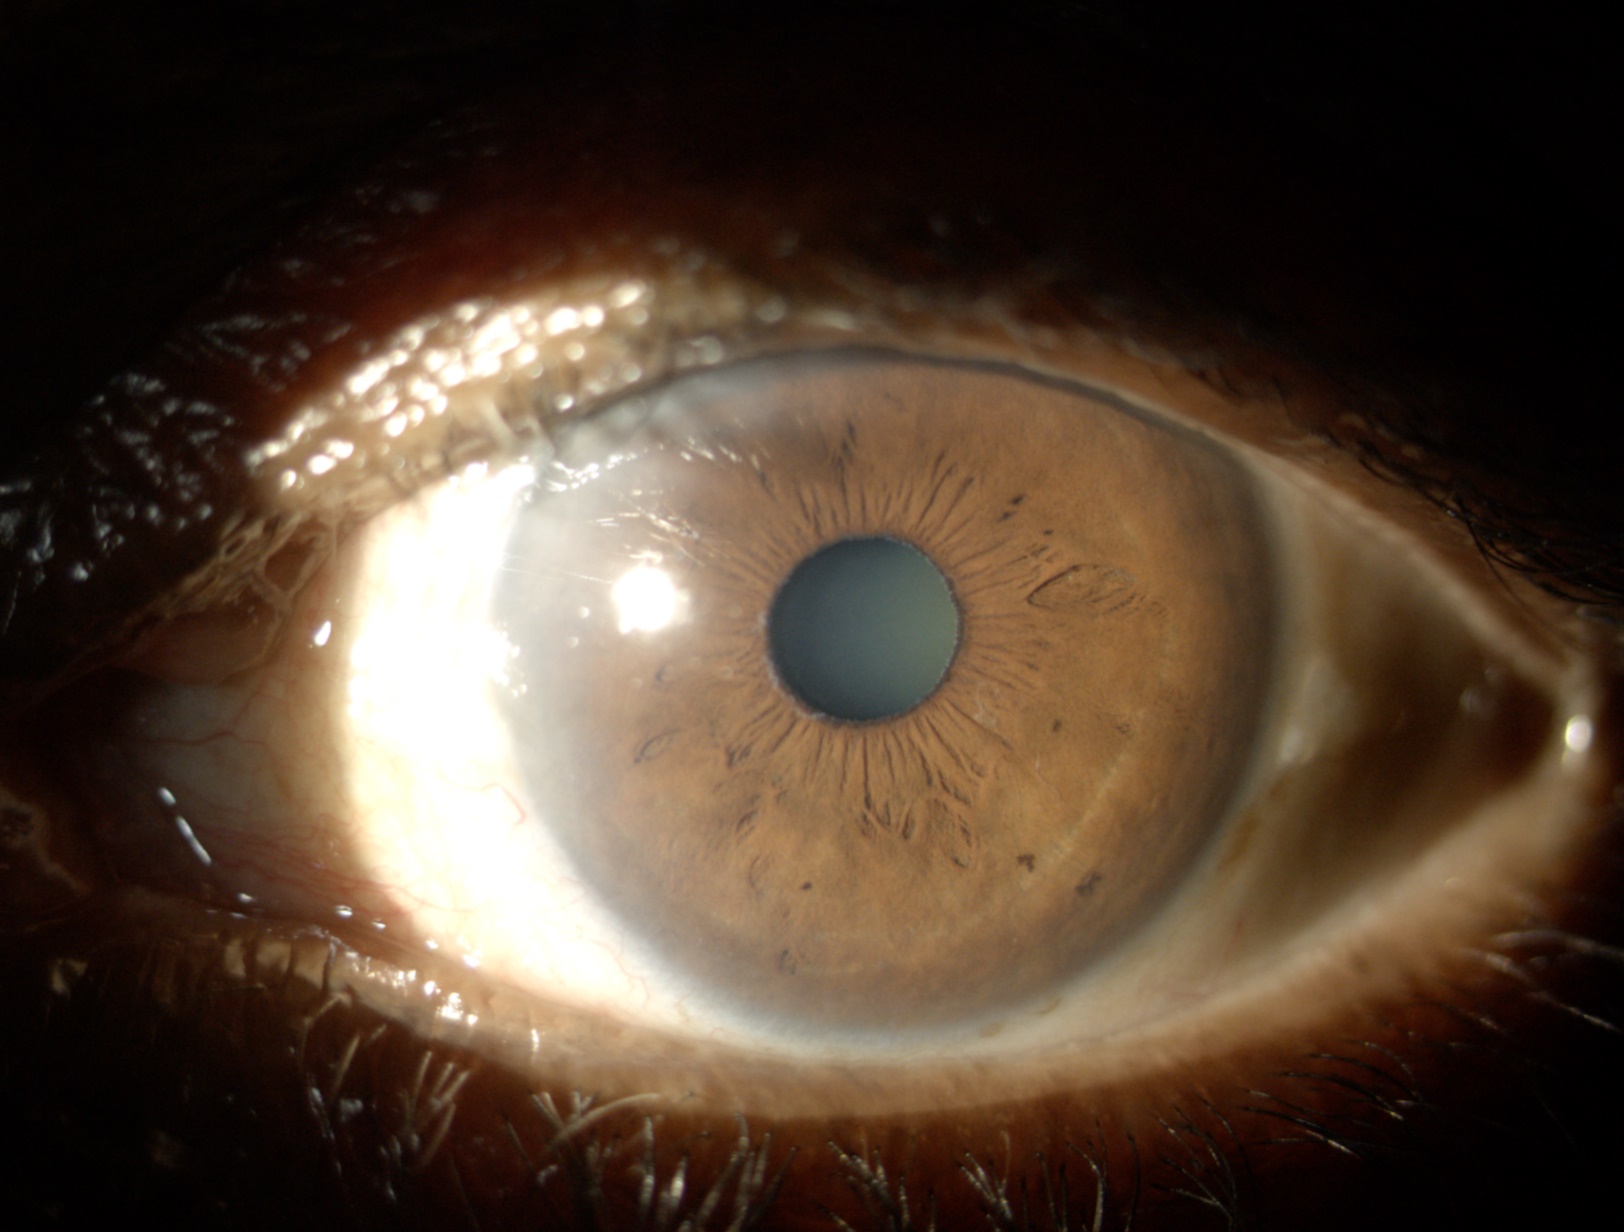 Slit lamp photograph of a left eye demonstrating pseudoexfoliation material on the pupillary margin